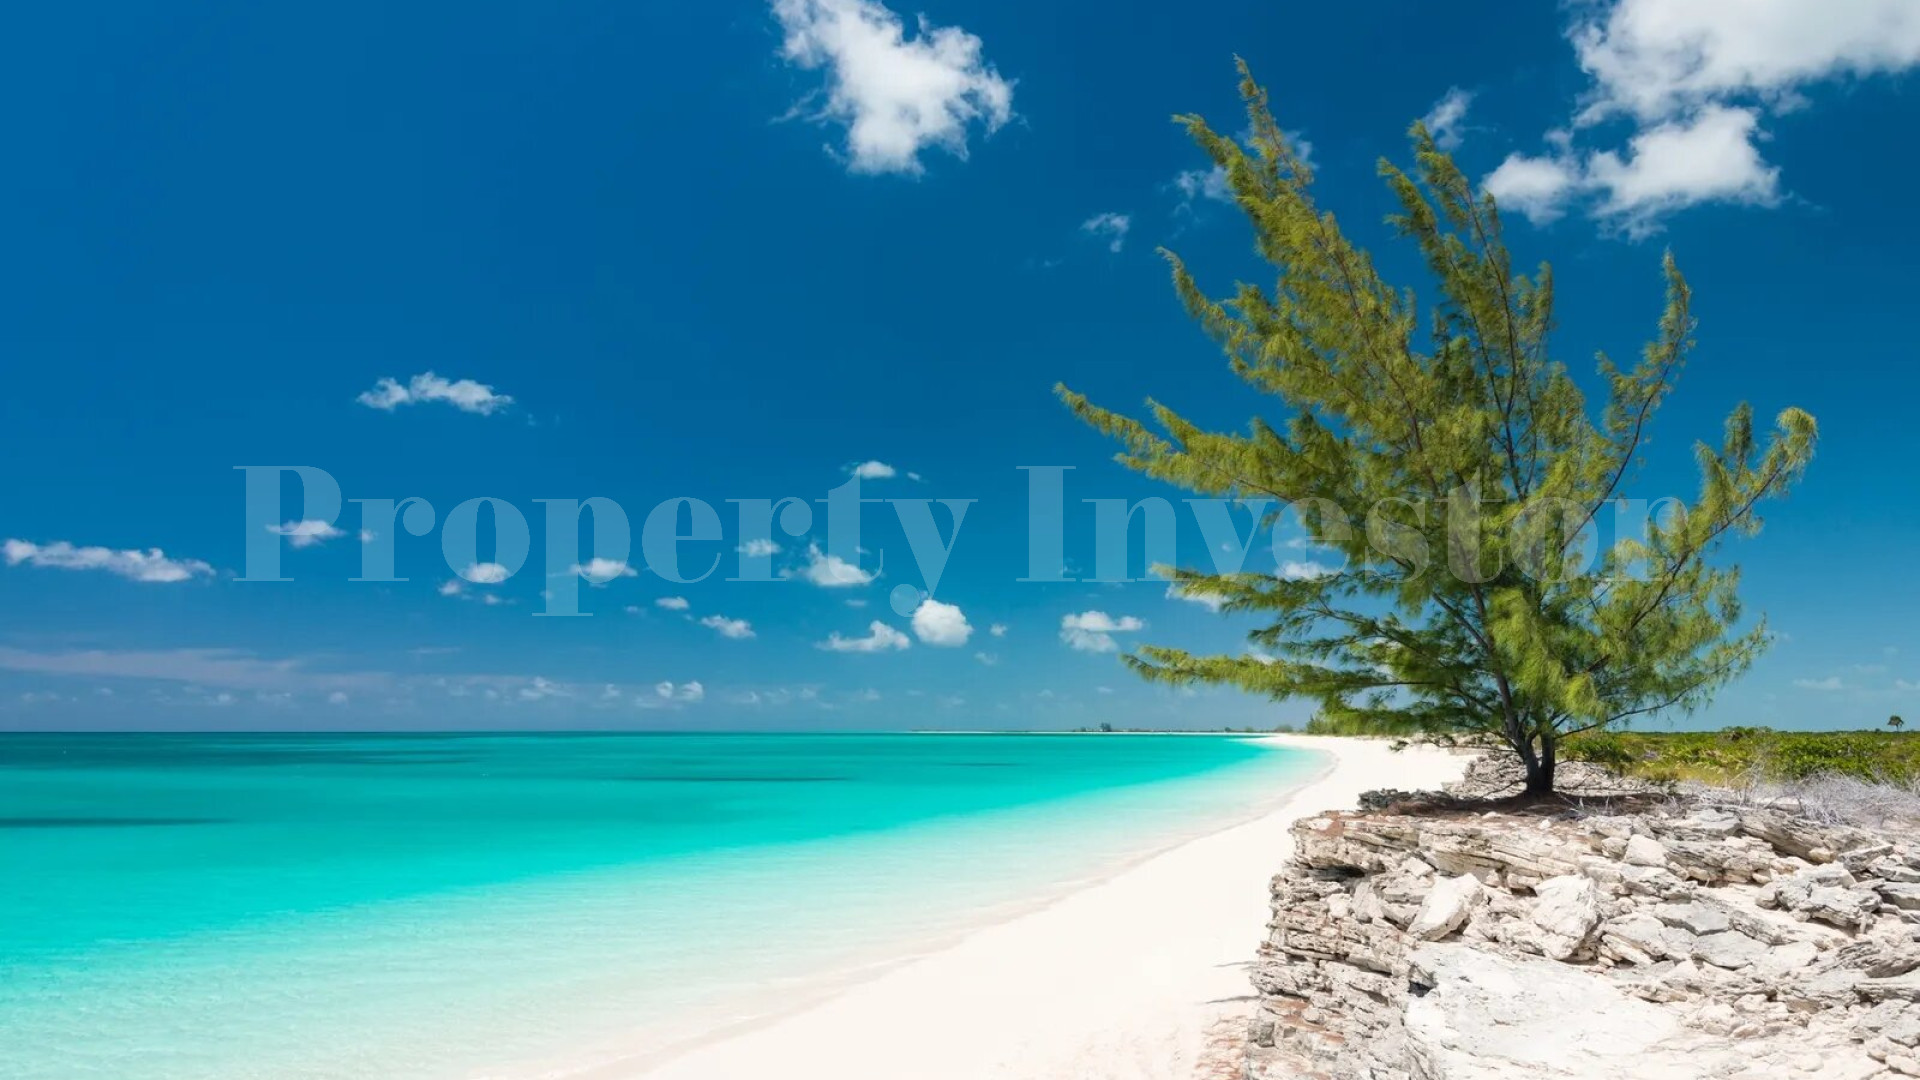 Expansive 174 Hectare Private Island Plot for Commercial Development for Sale in Turks & Caicos